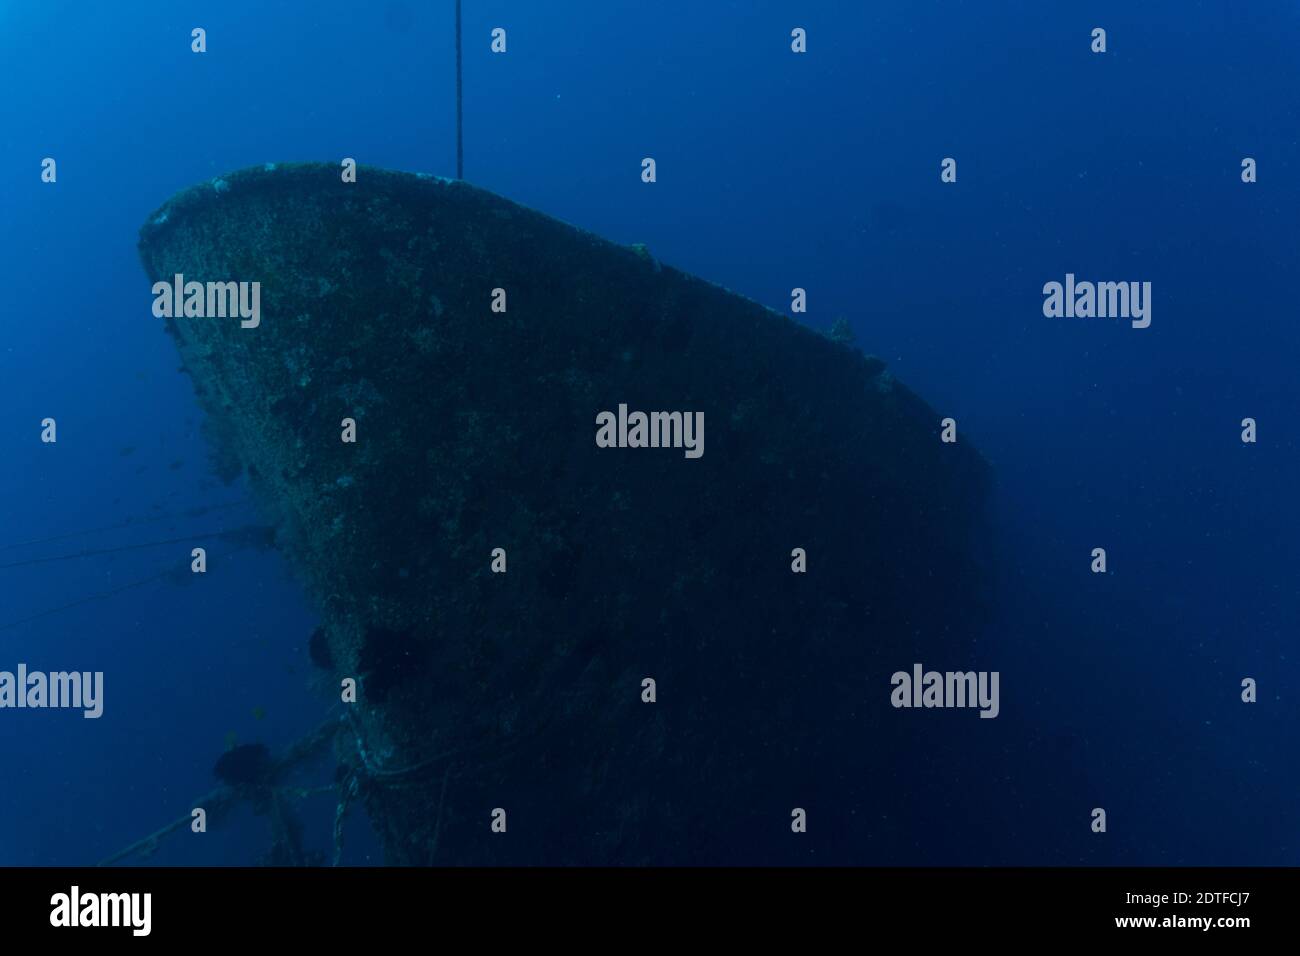 A Shipwreck photographed while scuba diving in Bali (Kubu Wreck Off Amed) Stock Photo